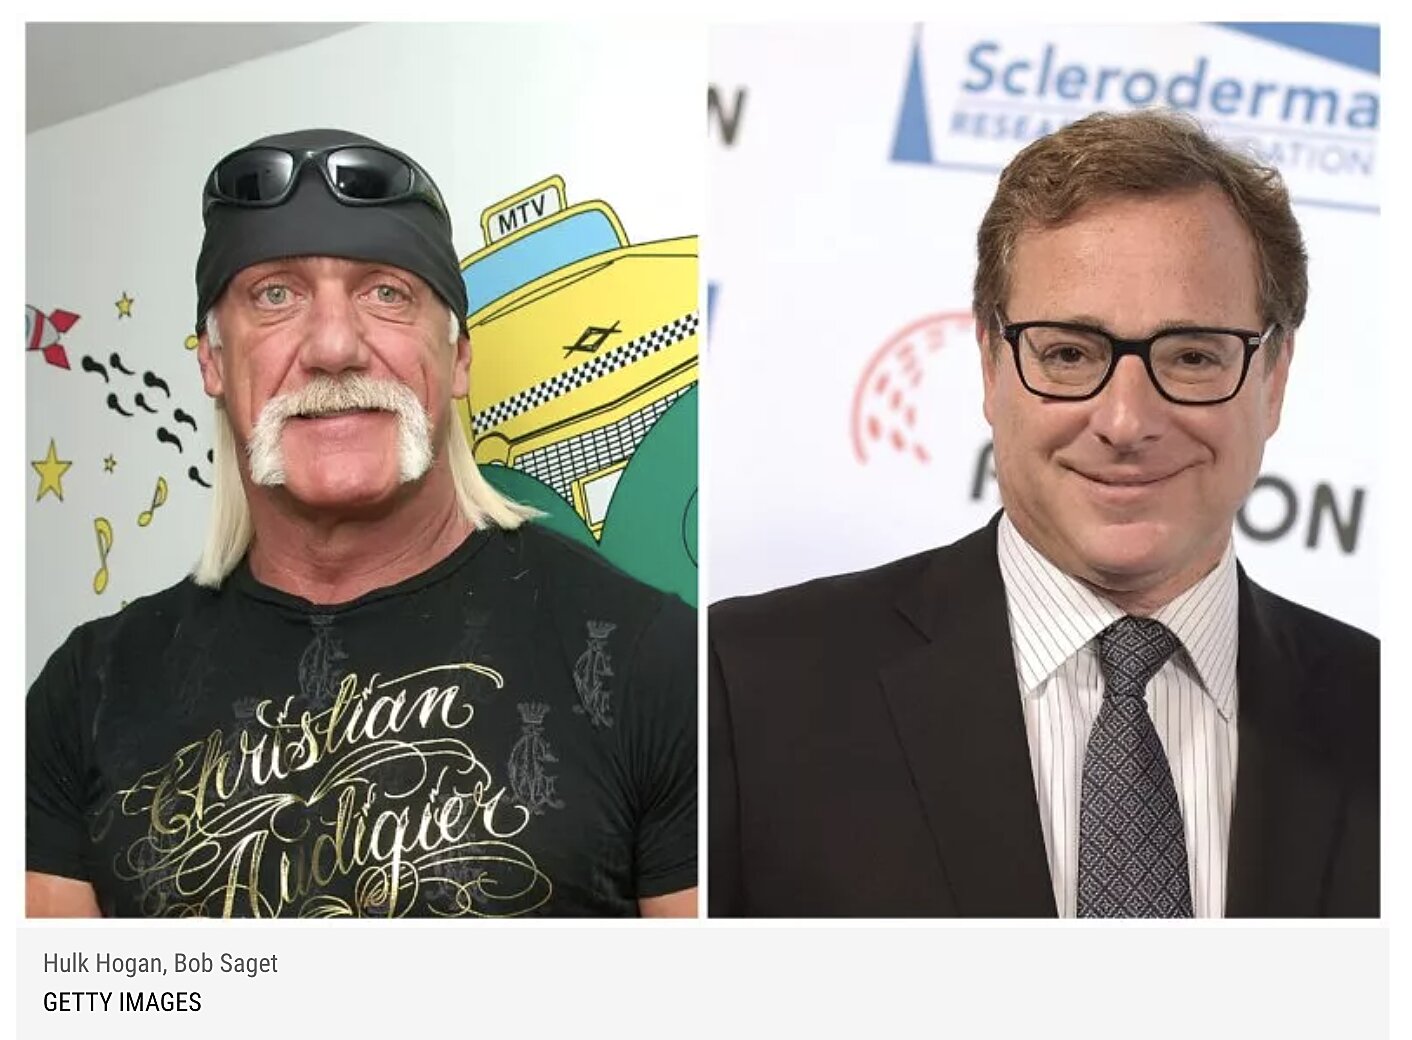 Hulk Hogan Appears To Share Conspiracy Theory About Bob Saget’s Death